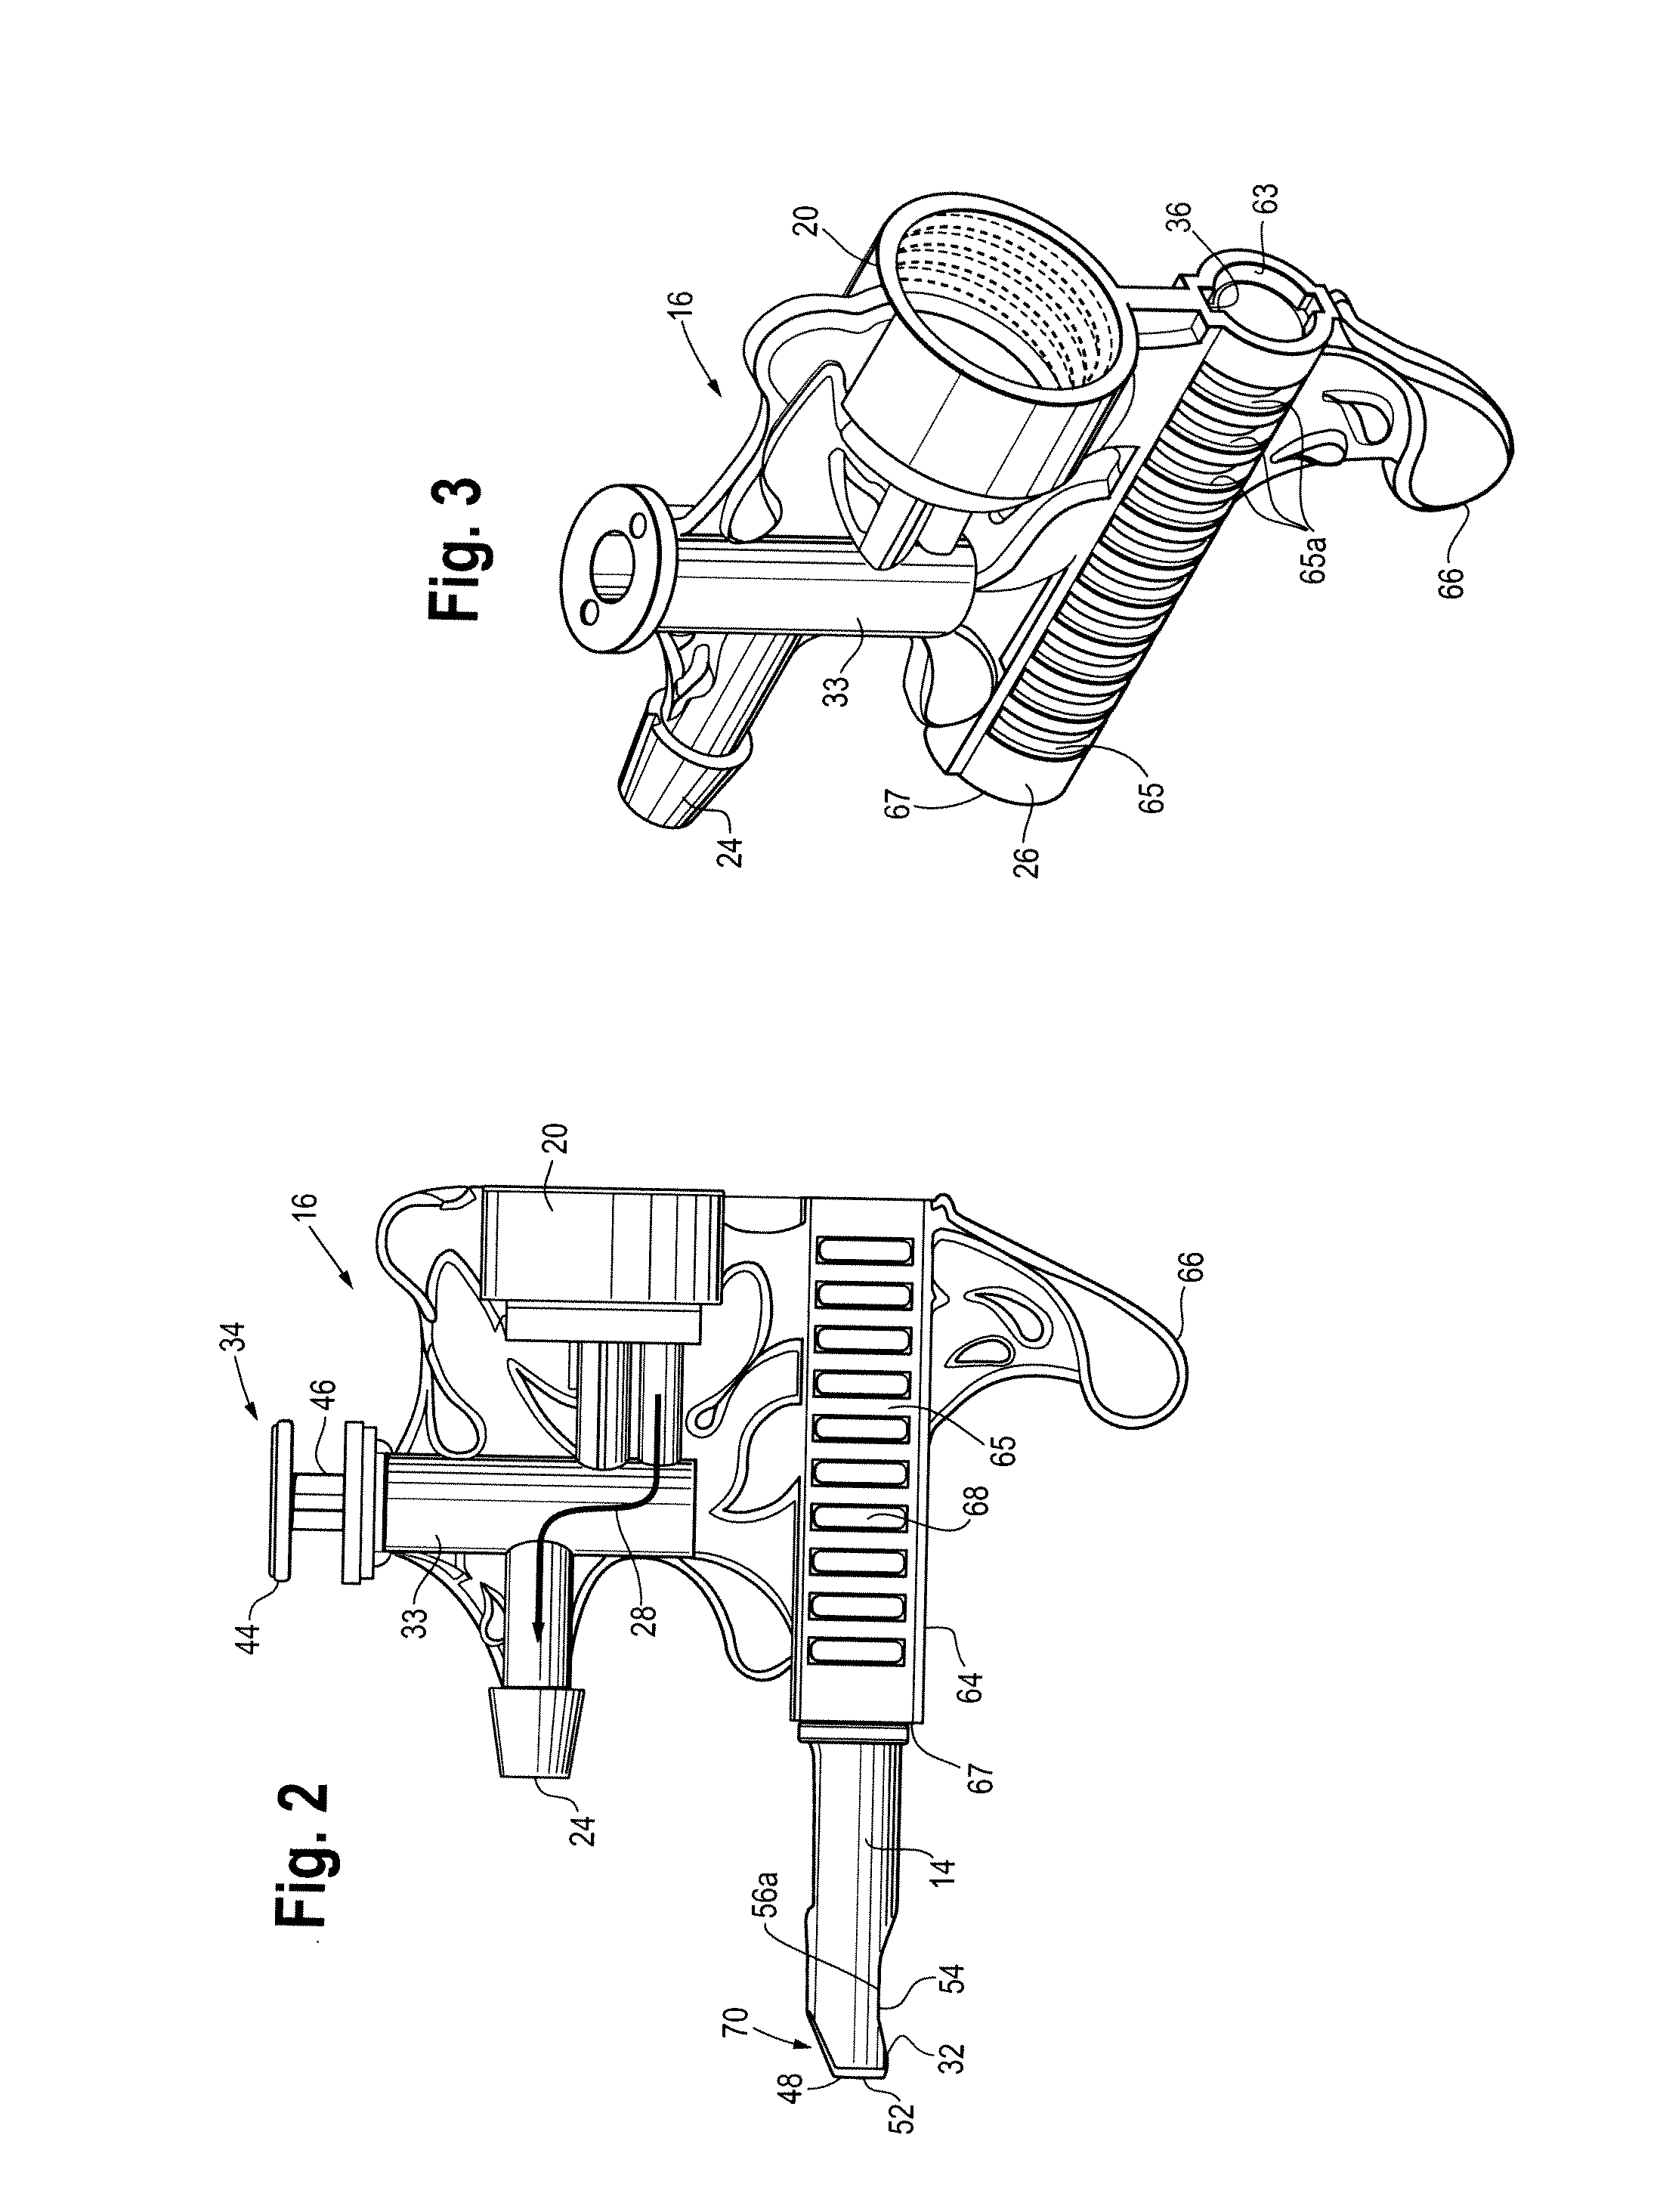 Balloon filling and tying device